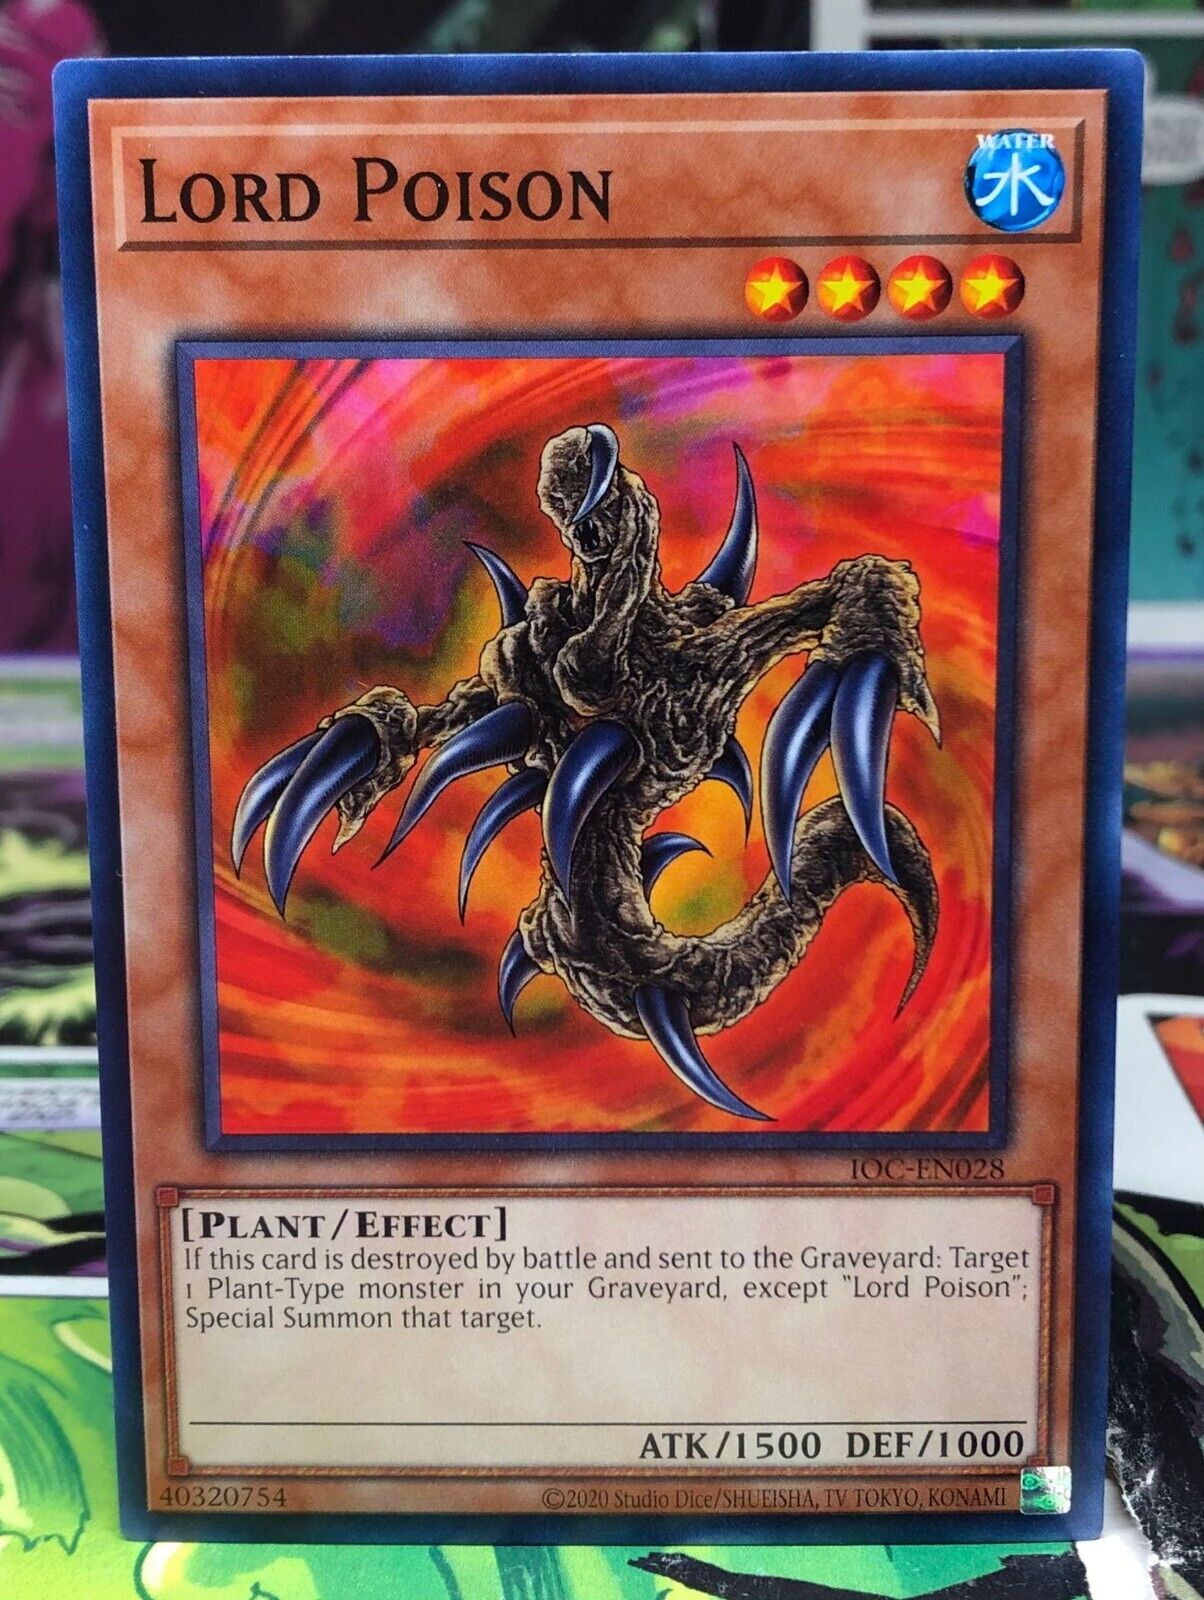 Yu-Gi-Oh TCG Invasion of Chaos Lord Poison 40320754